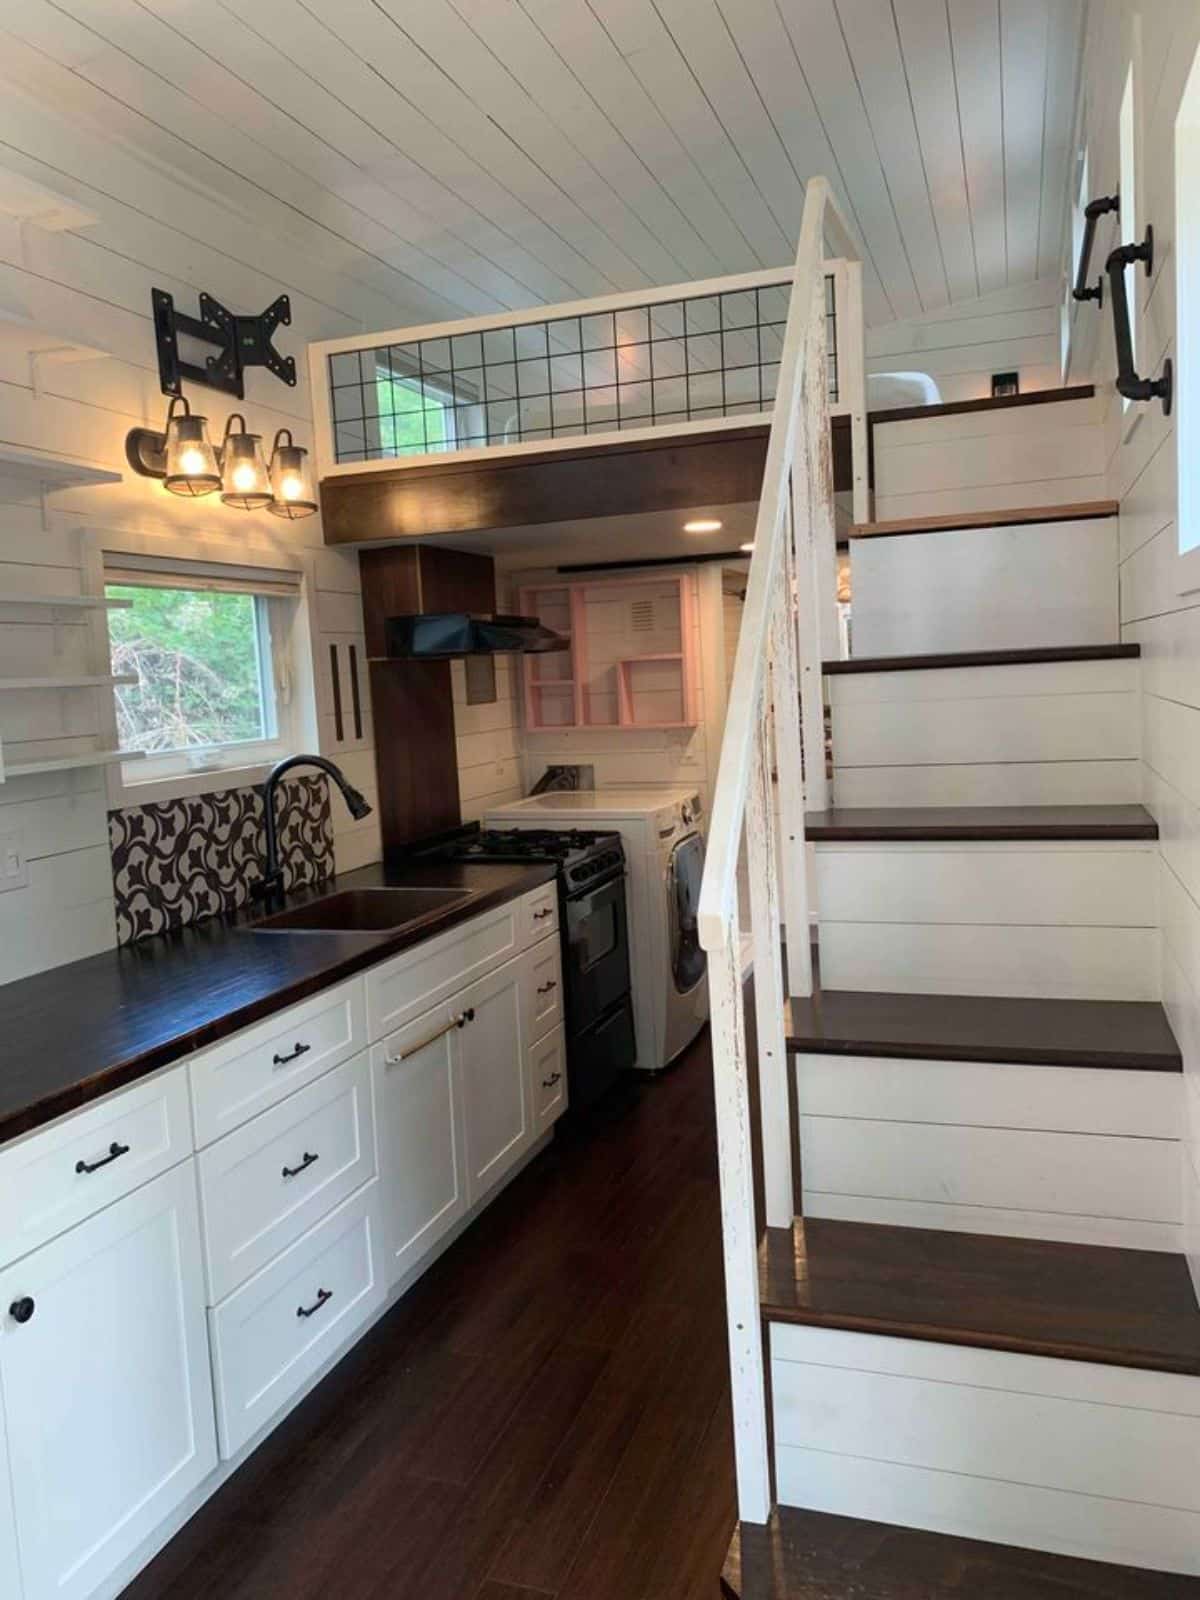 stunning interiors of 24’ tiny home with deck